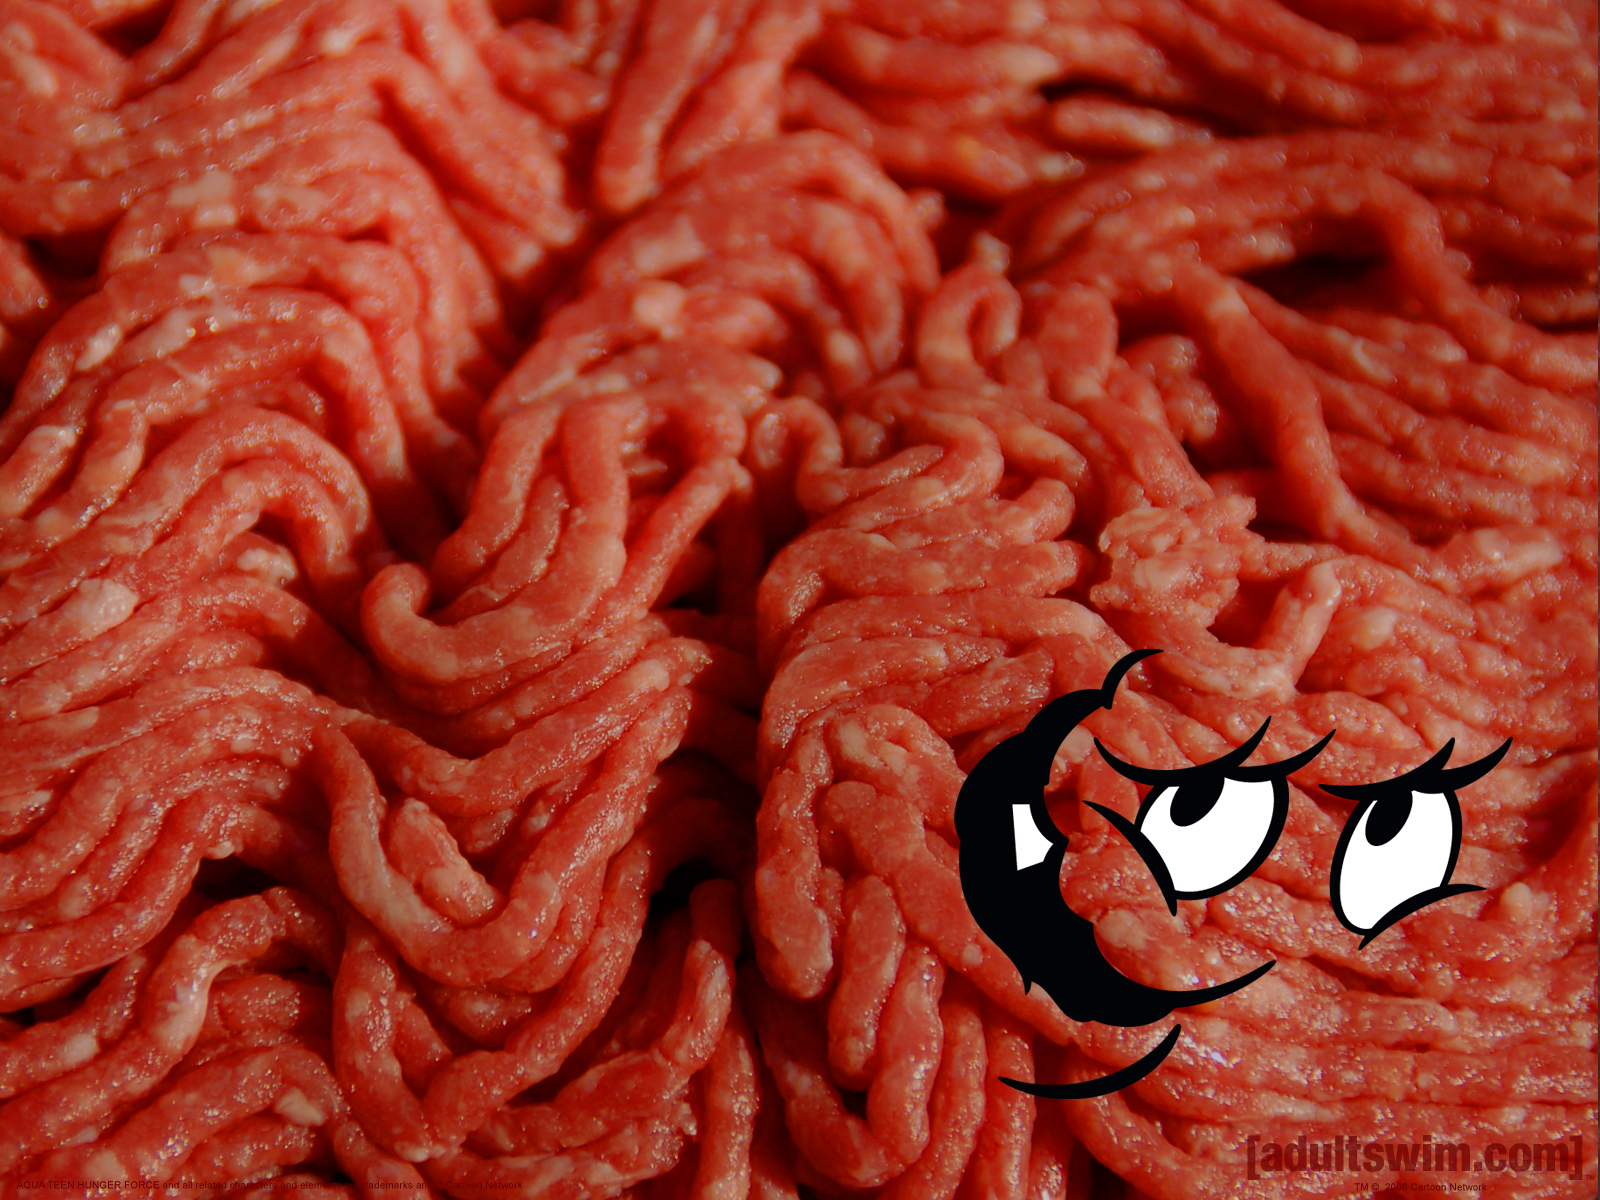 ModernSauce: Saved by Meatwad. Yet again.